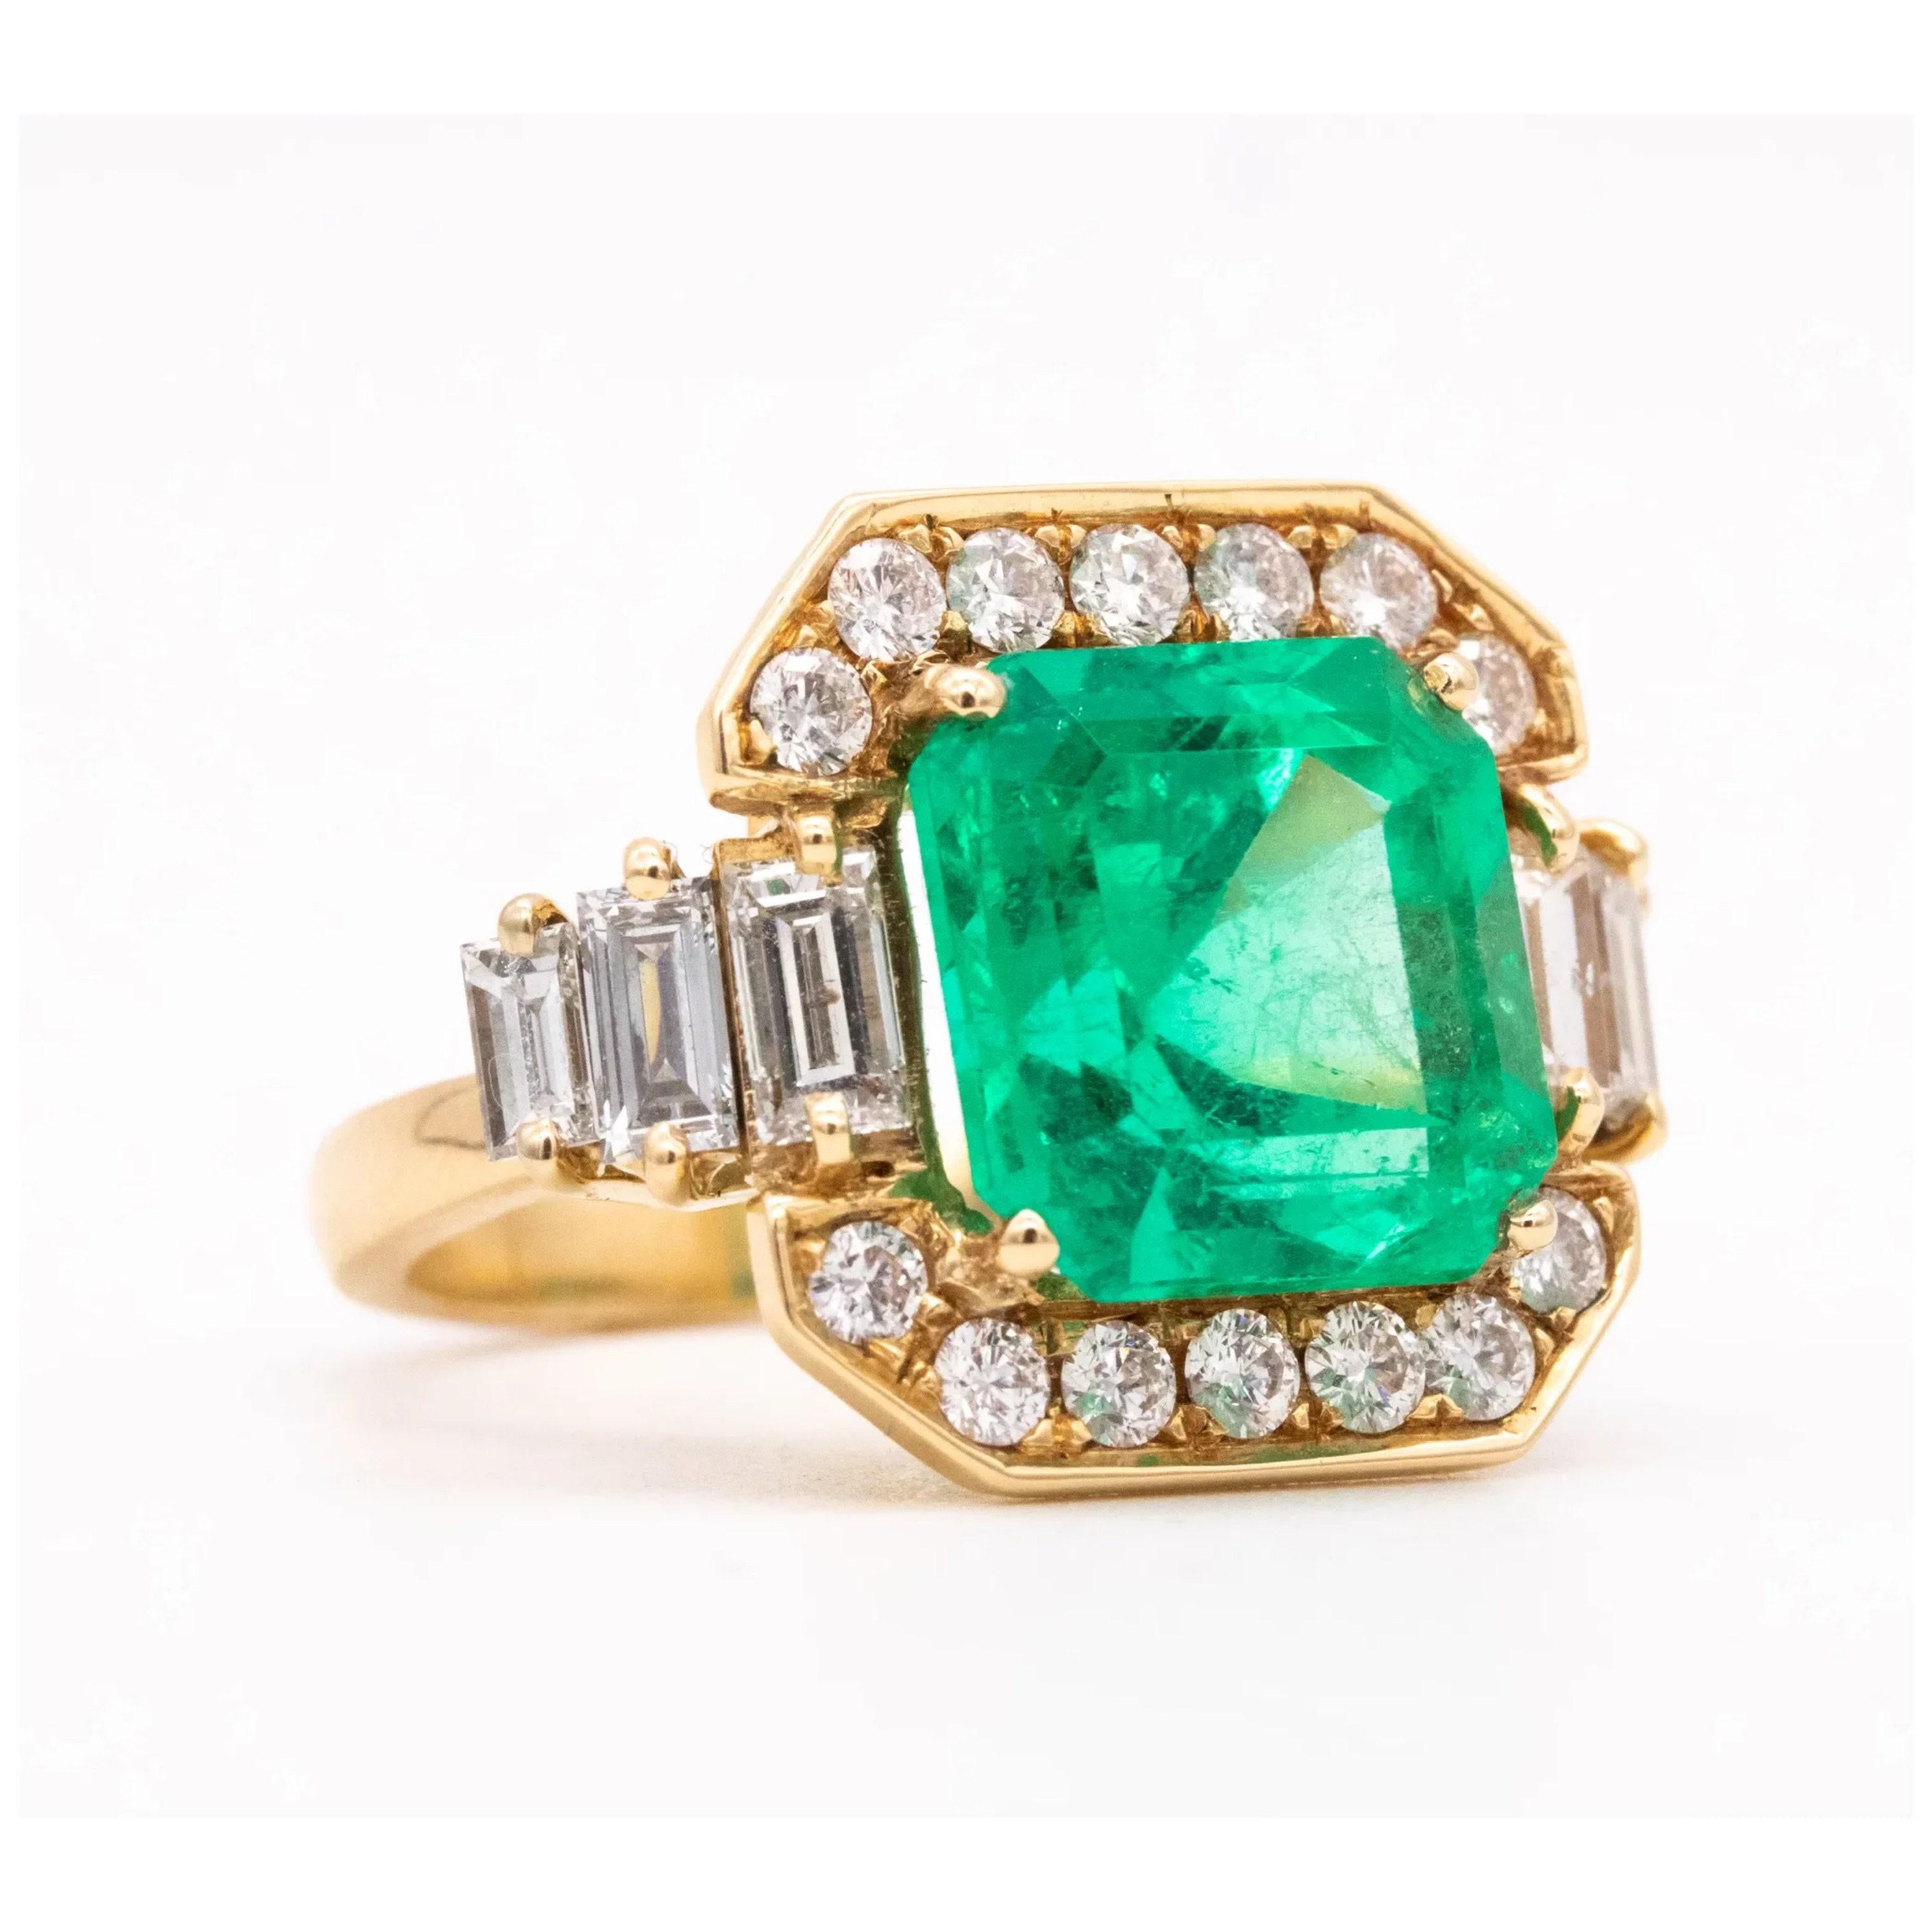 For Sale:  Certified 4.03 Carat Emerald Diamond Vintage Style Cocktail Ring in 18K Gold 2